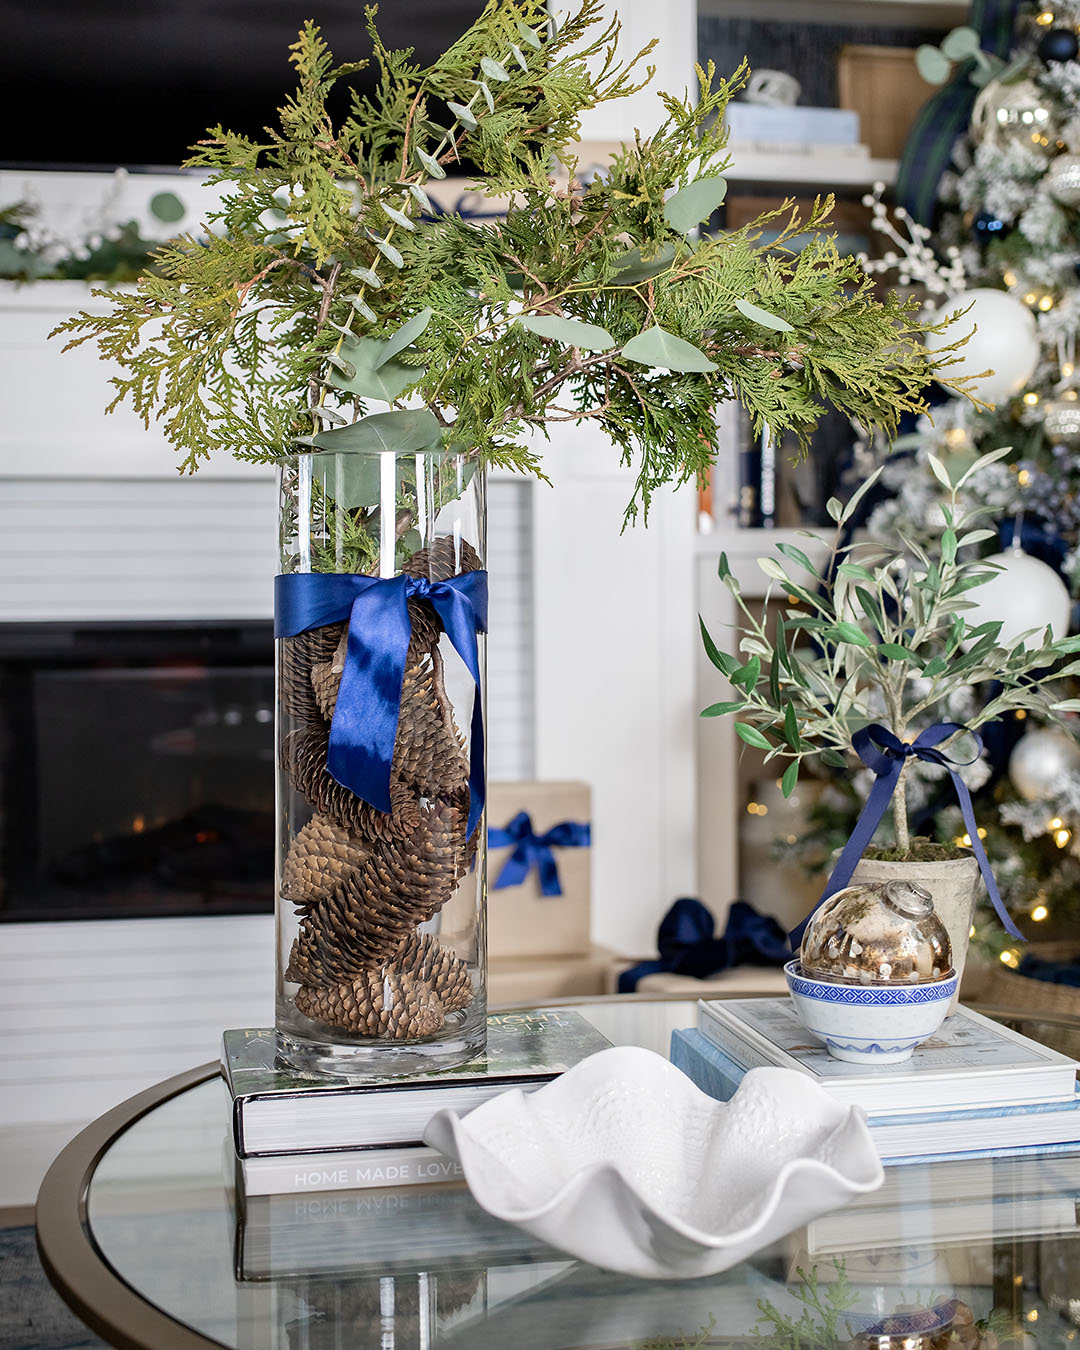 When it comes to almost anything, simple is best and Christmas decor is no exception! Here are my favourite simple Christmas decor ideas that use things you probably already have around the house!